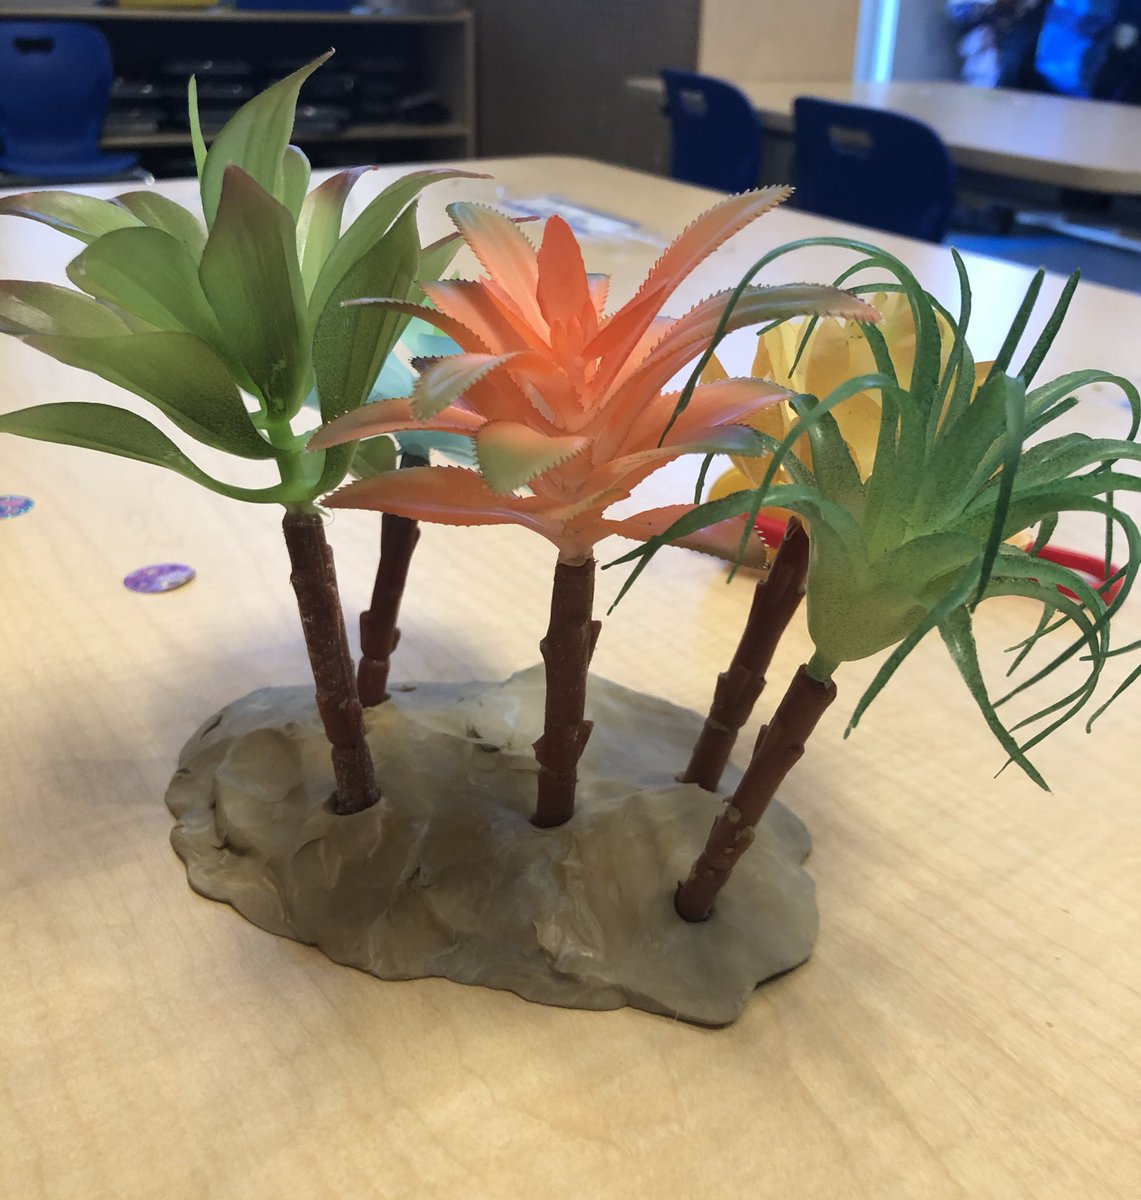 You may see play dough and plants... while we see... #finemotorskills #calmingstrategy #creativity #curiosity #socialskills #turntaking and so much more! @alcdsb_stfa @PupsStfa